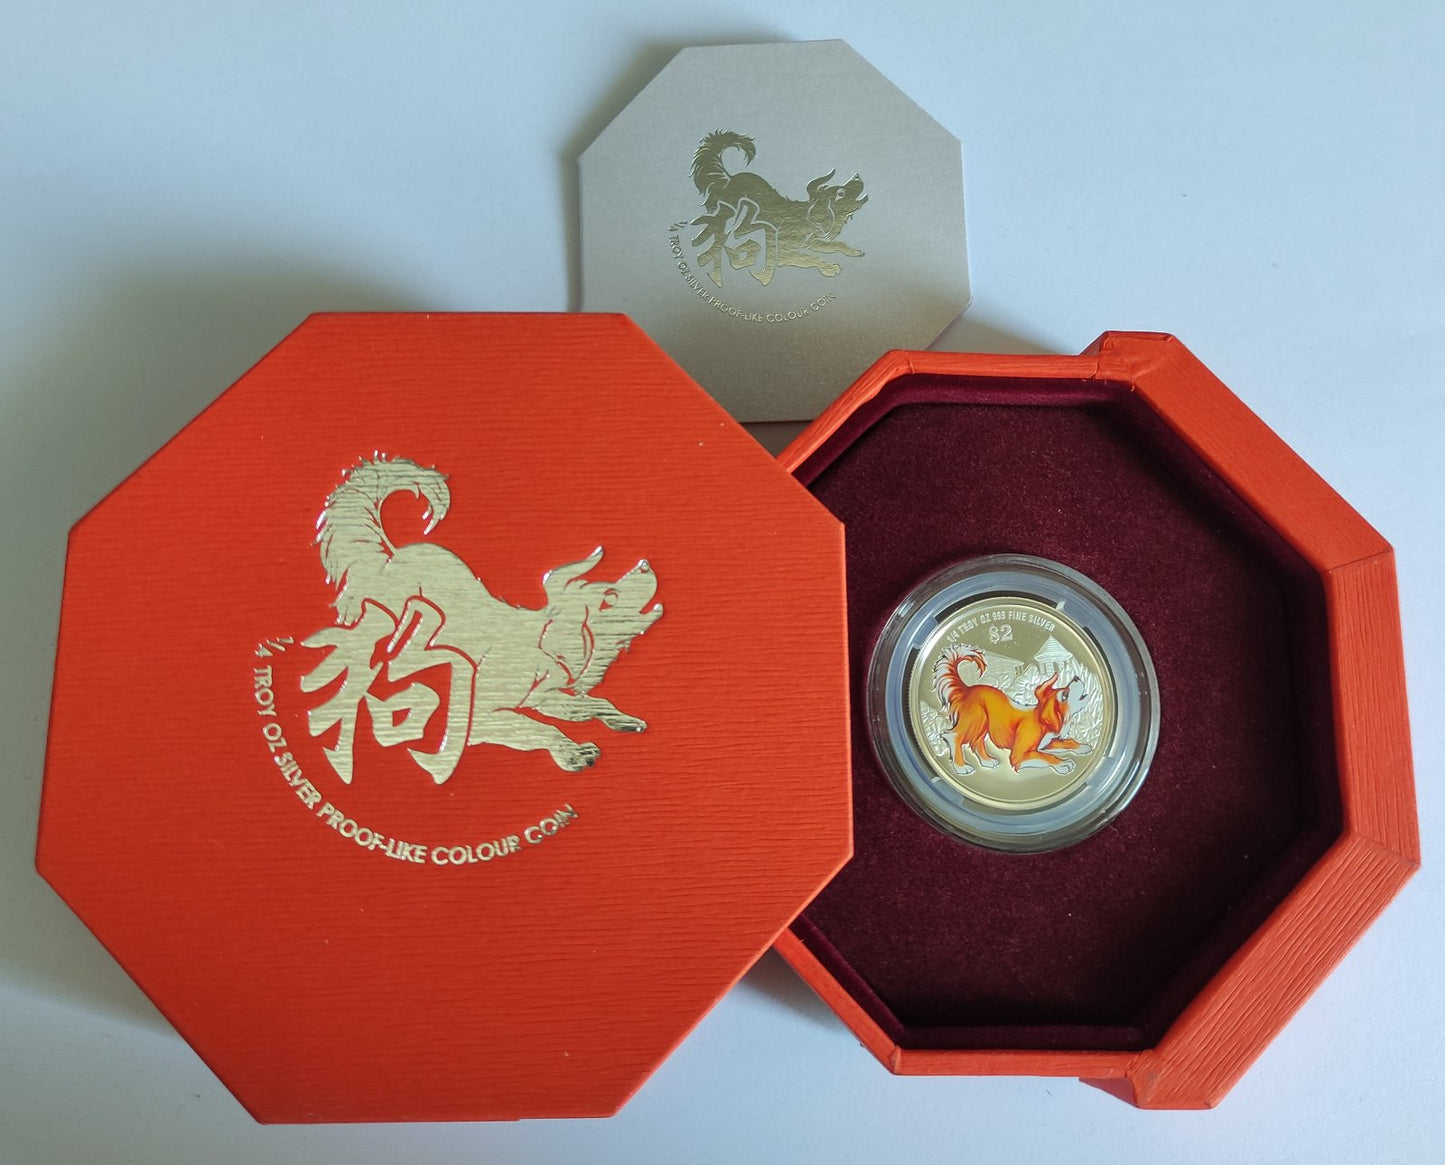 2018 Singapore Lunar Dog 1/4 oz Silver Prooflike Coin in Capsule with Case and COA